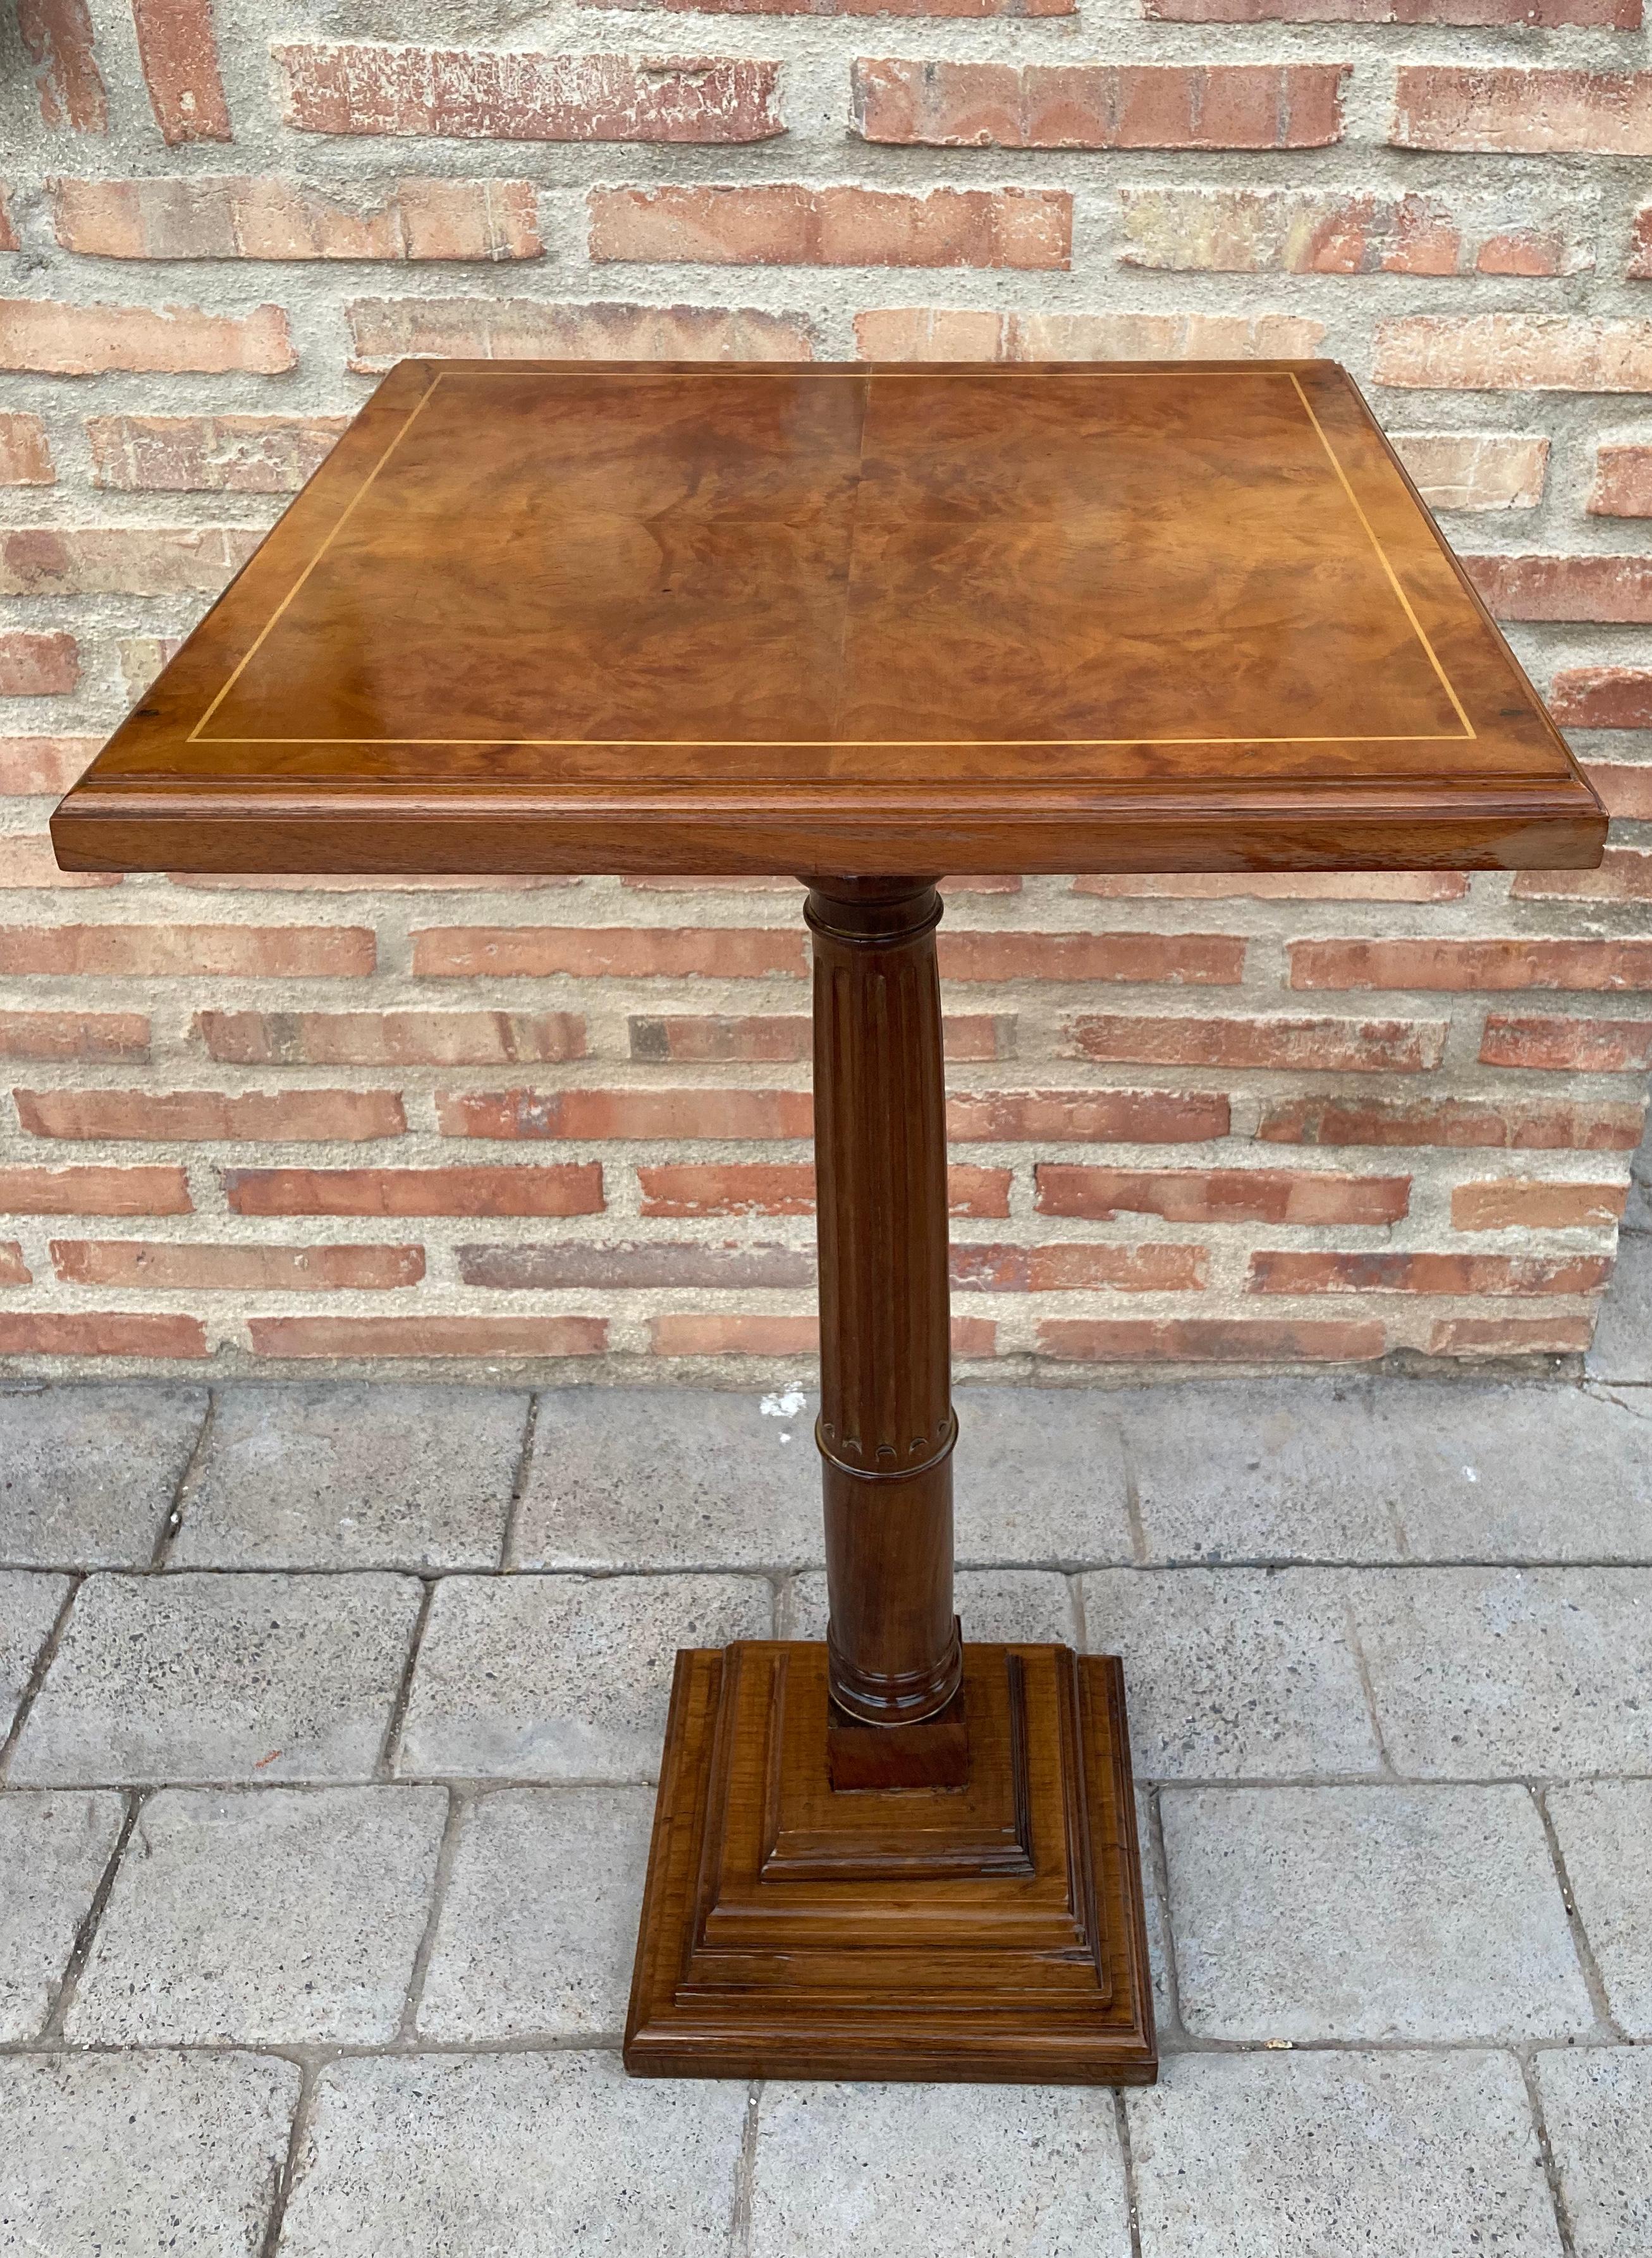 French Mid-20th Century Walnut Wood Square Top Pedestal Table For Sale